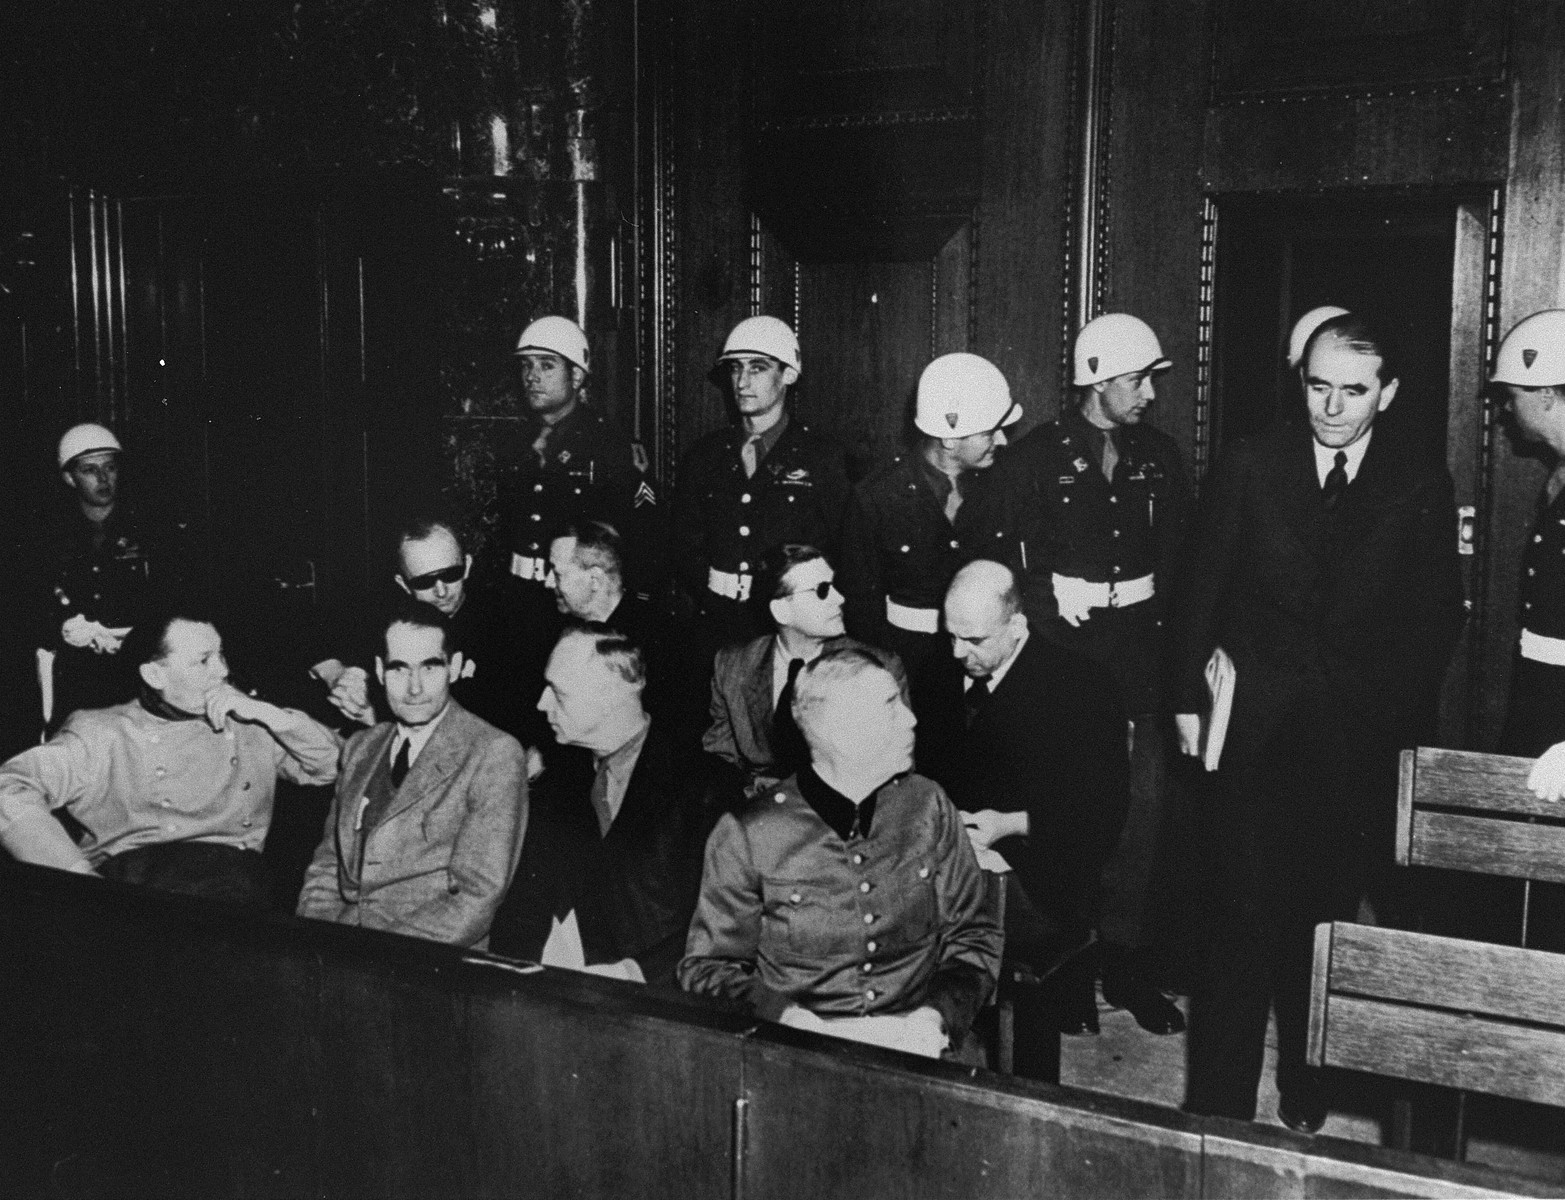 The defendants are led into the dock at the International Military Tribunal trial of war criminals at Nuremberg.

Pictured in the front row from left to right are: Hermann Goering, Rudolf Hess, Joachim von Ribbentrop and Wilhelm Keitel.  In the second row from left to right are: Karl Doenitz, Erich Raeder, Baldur von Schirach and Fritz Sauckel.